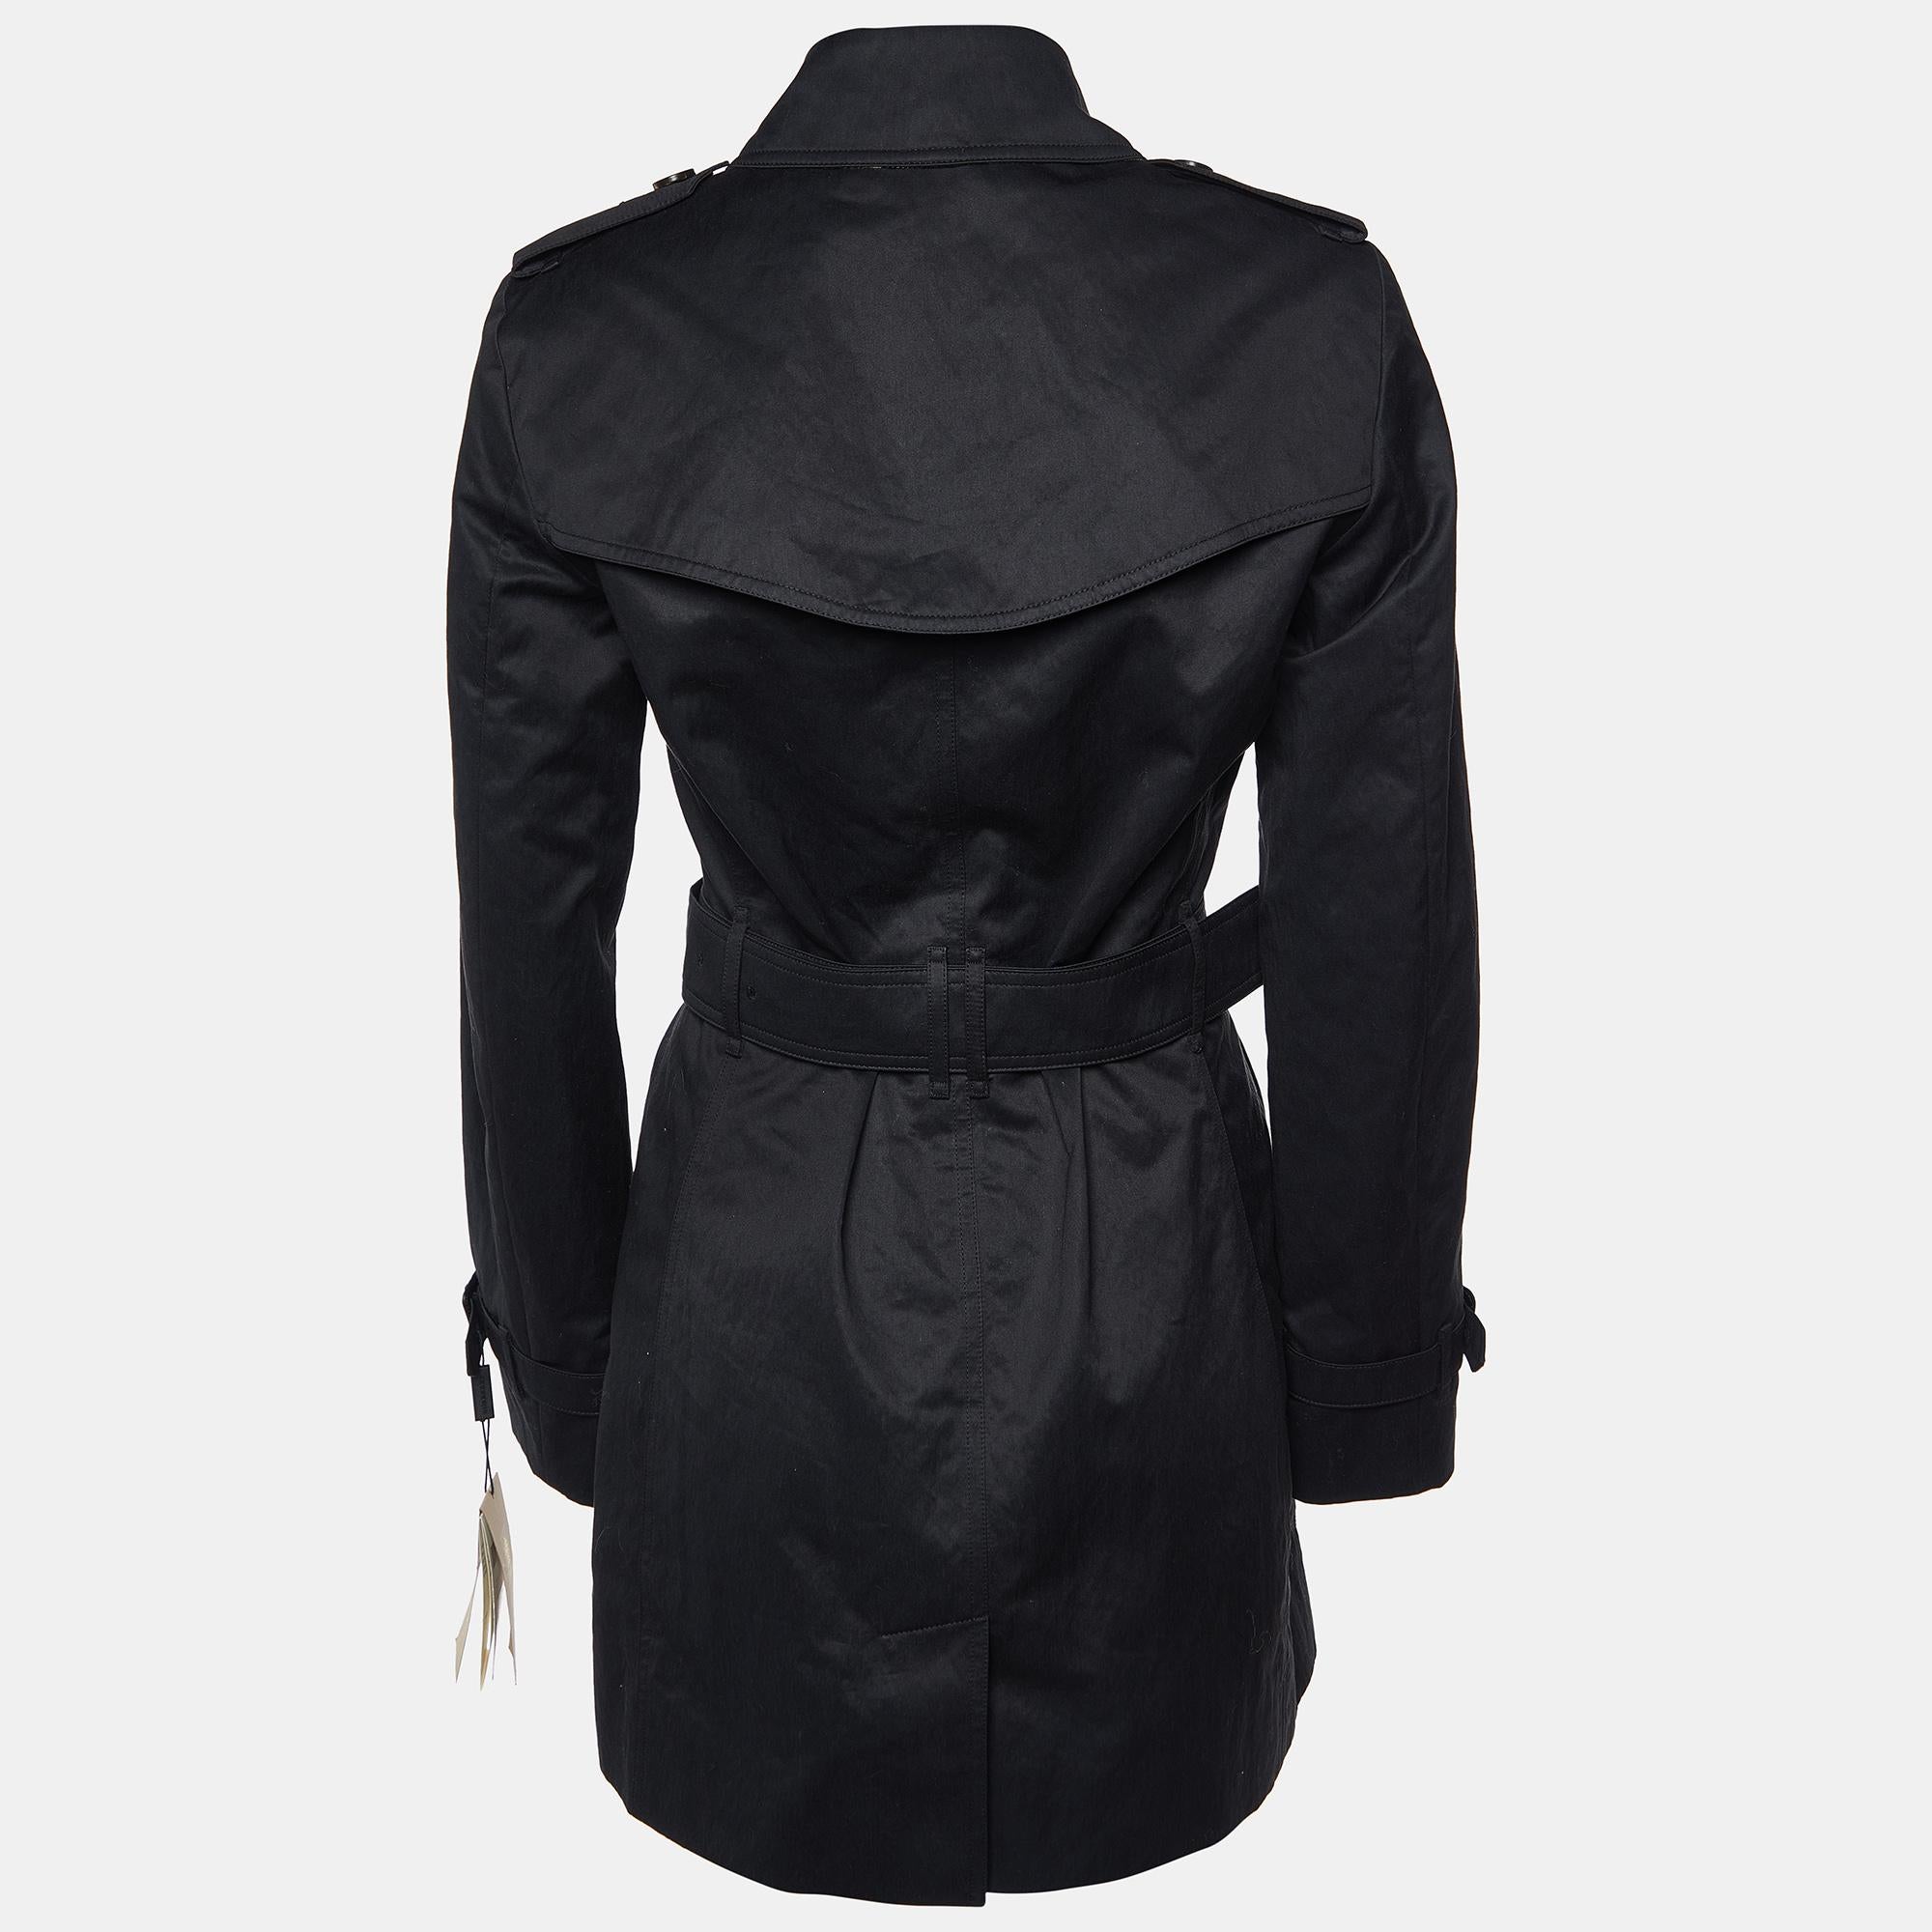 Black Burberry Harbourne trench coat with pointed collar, crew neck, dual welt pockets at front, tonal stitching throughout, Nova Check lining at interior, long sleeves, belt buckle closure at waist and button closures at center front.

Includes: